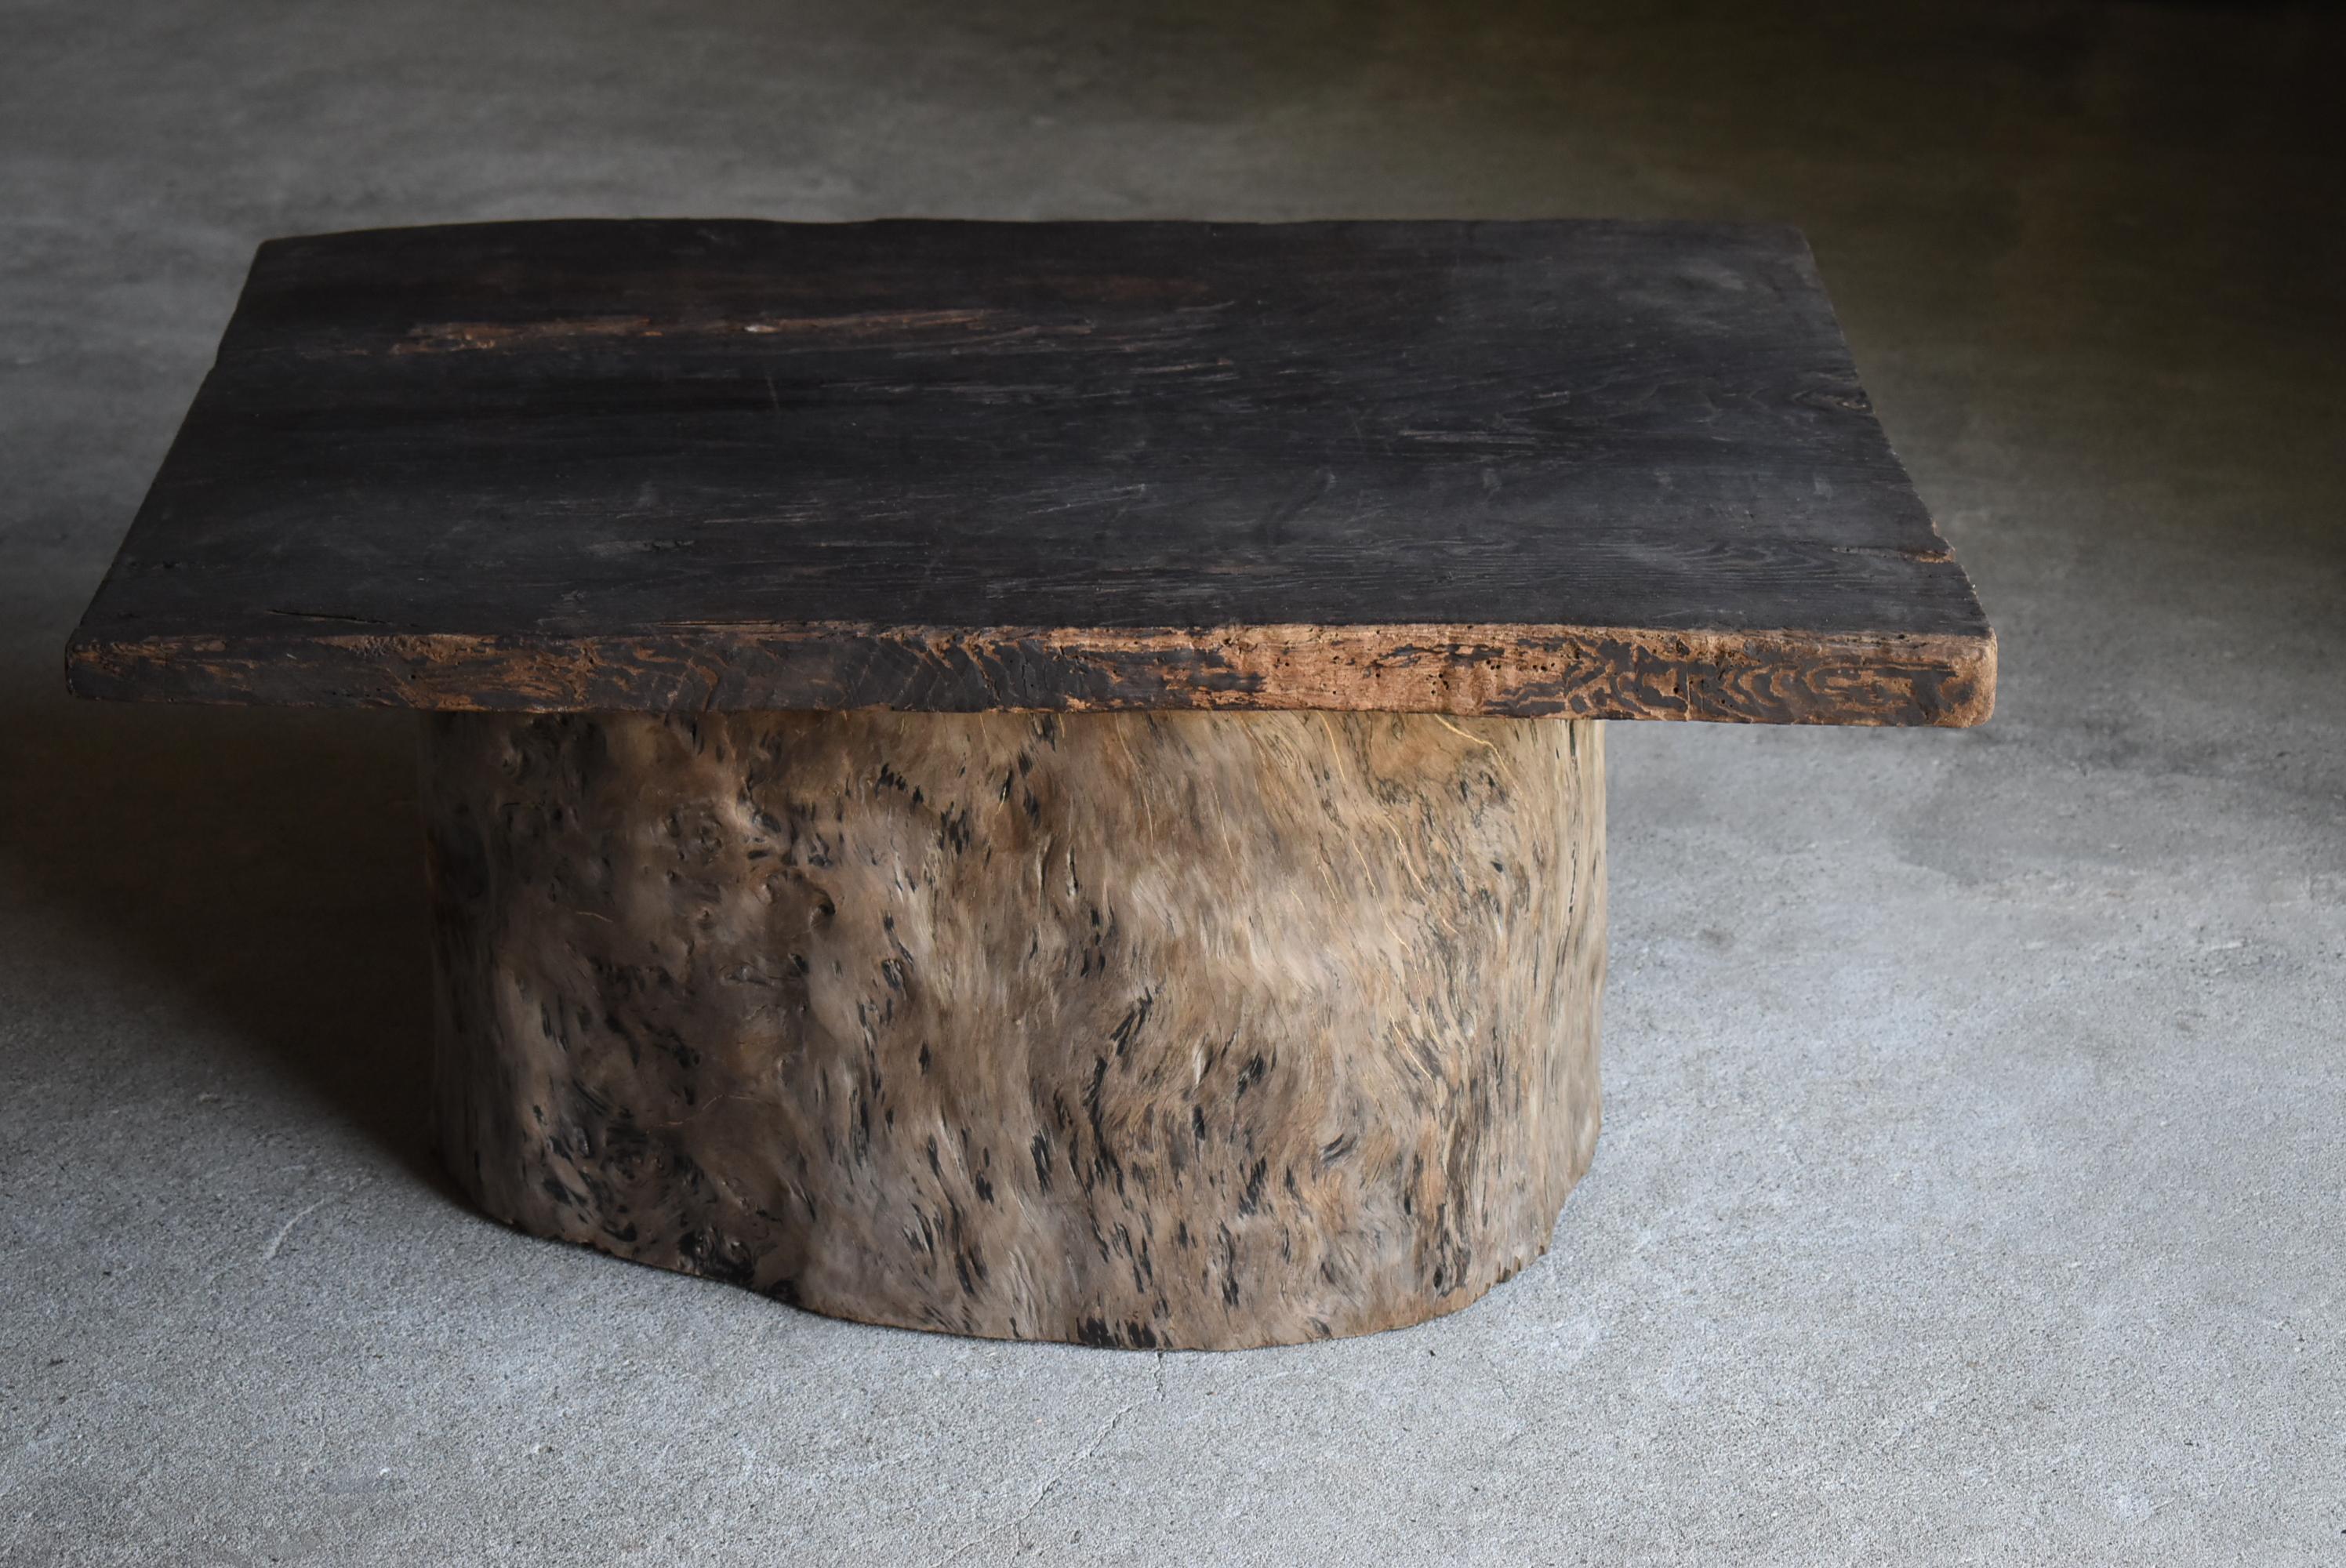 This is a very old Japanese low table.
It is designed to have a wooden board on top of a stump.
The wooden board is made of chestnut wood and the stump is made of zelkova wood.
Both materials are from the Meiji period (1860s-1900s).
Each